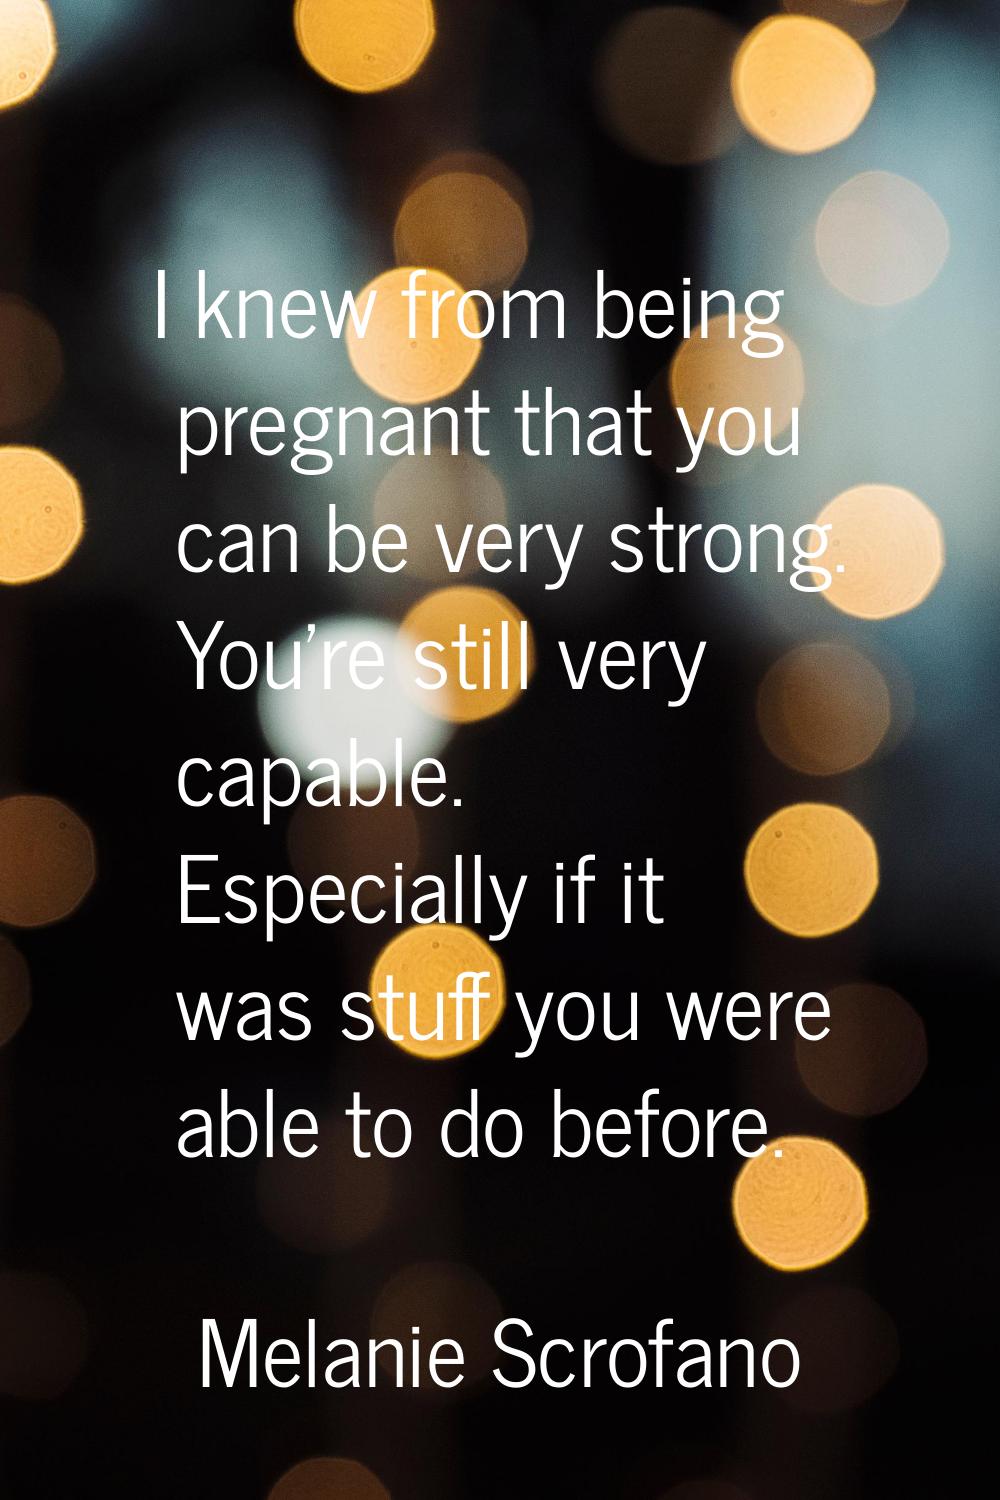 I knew from being pregnant that you can be very strong. You're still very capable. Especially if it